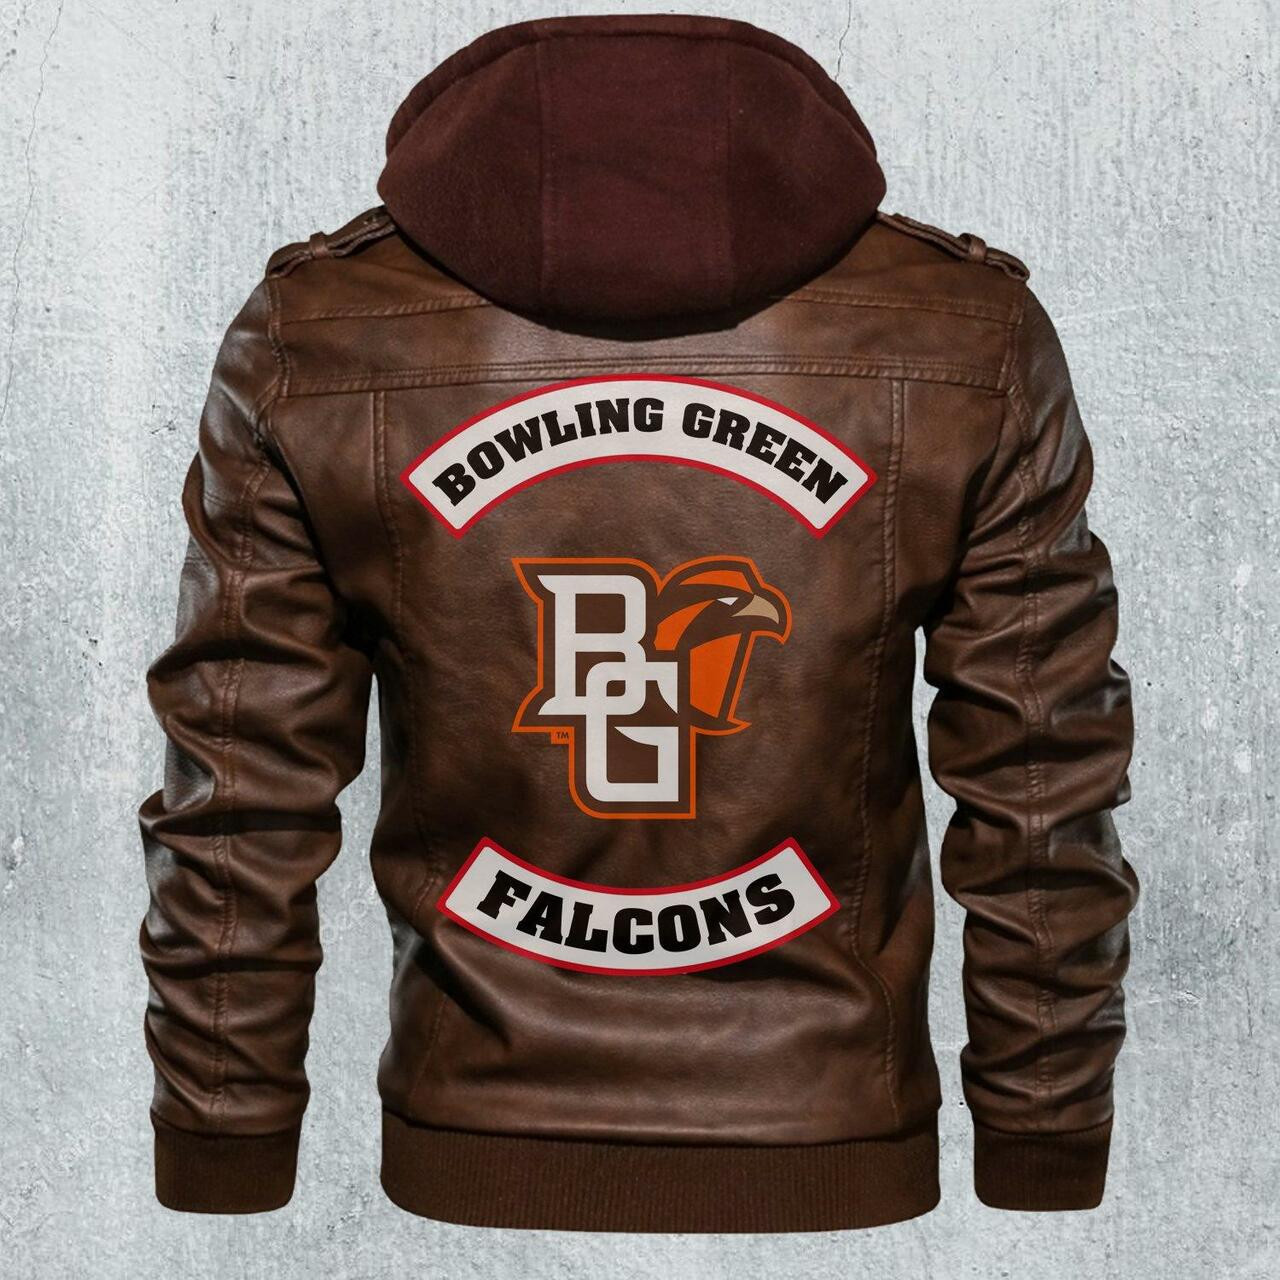 Check out our collection of the latest and greatest leather jacket 187